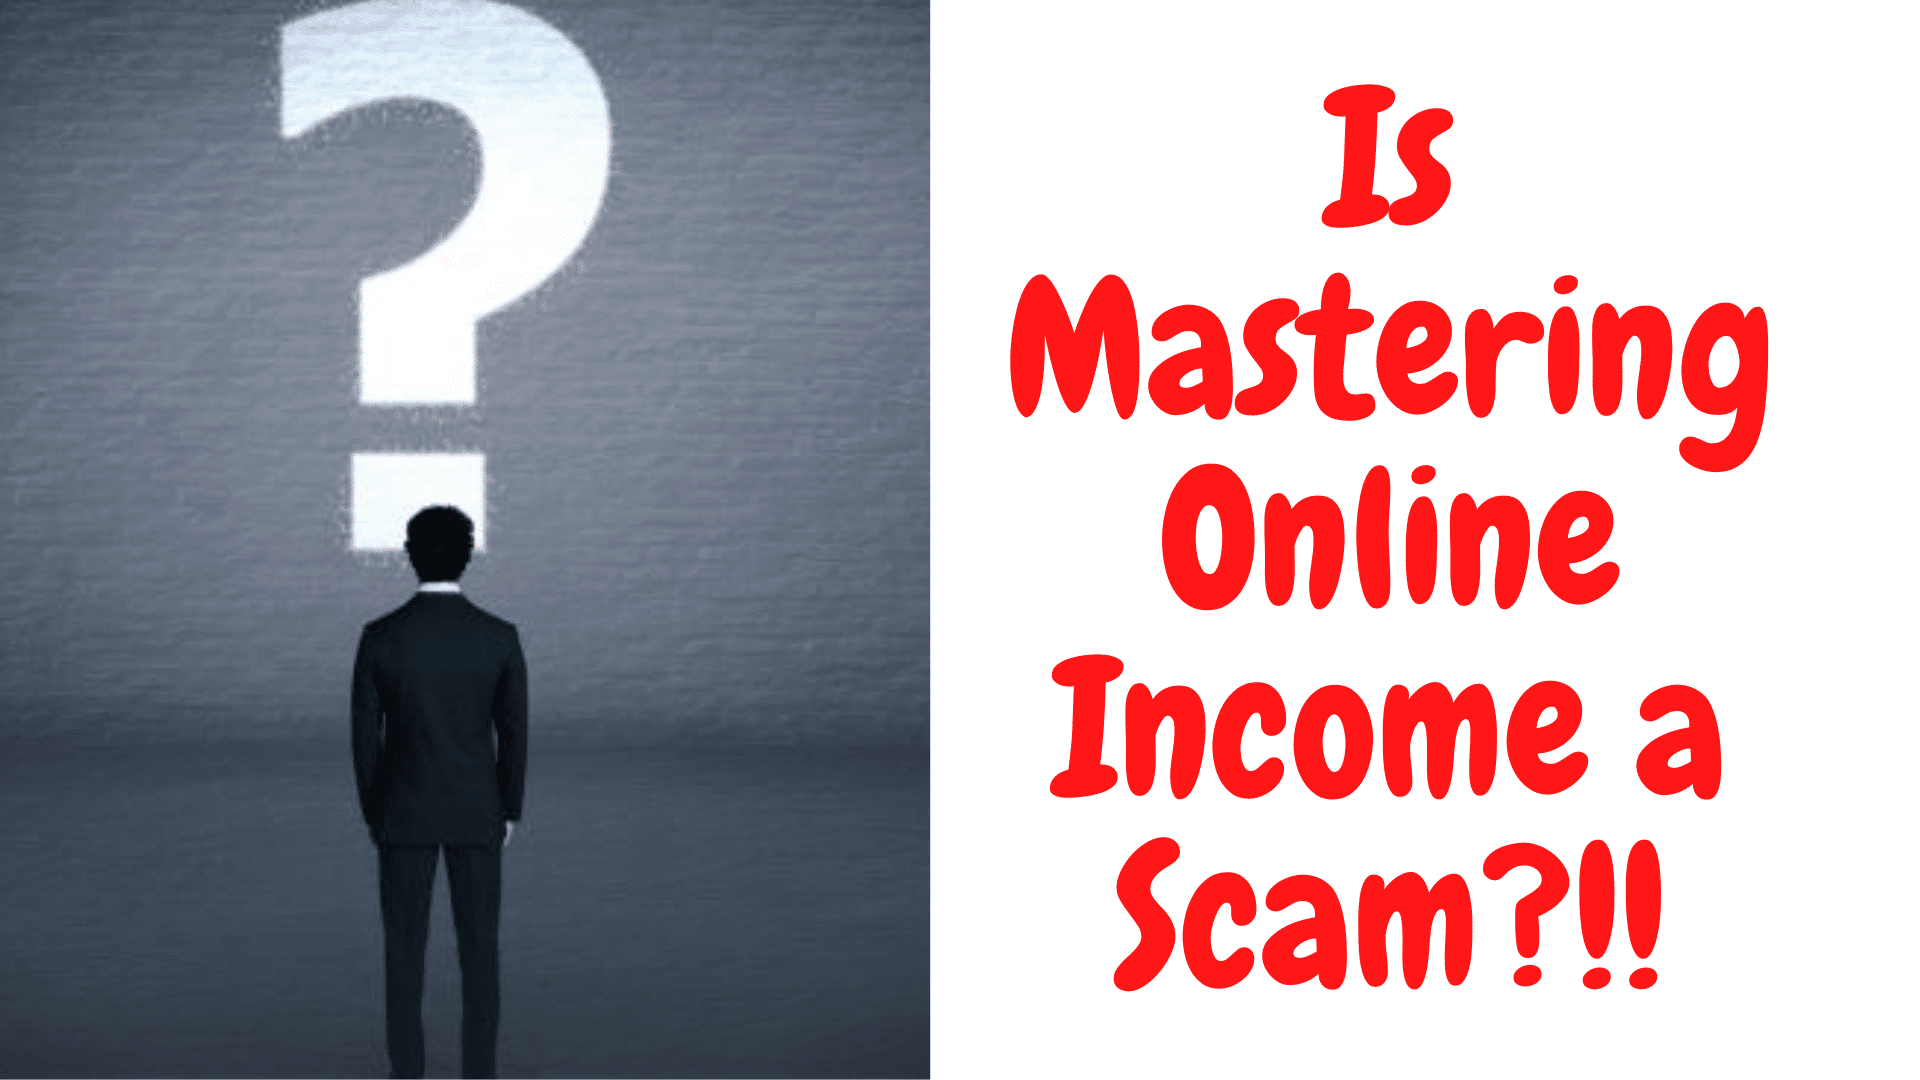 Mastering Online Income Intro Image